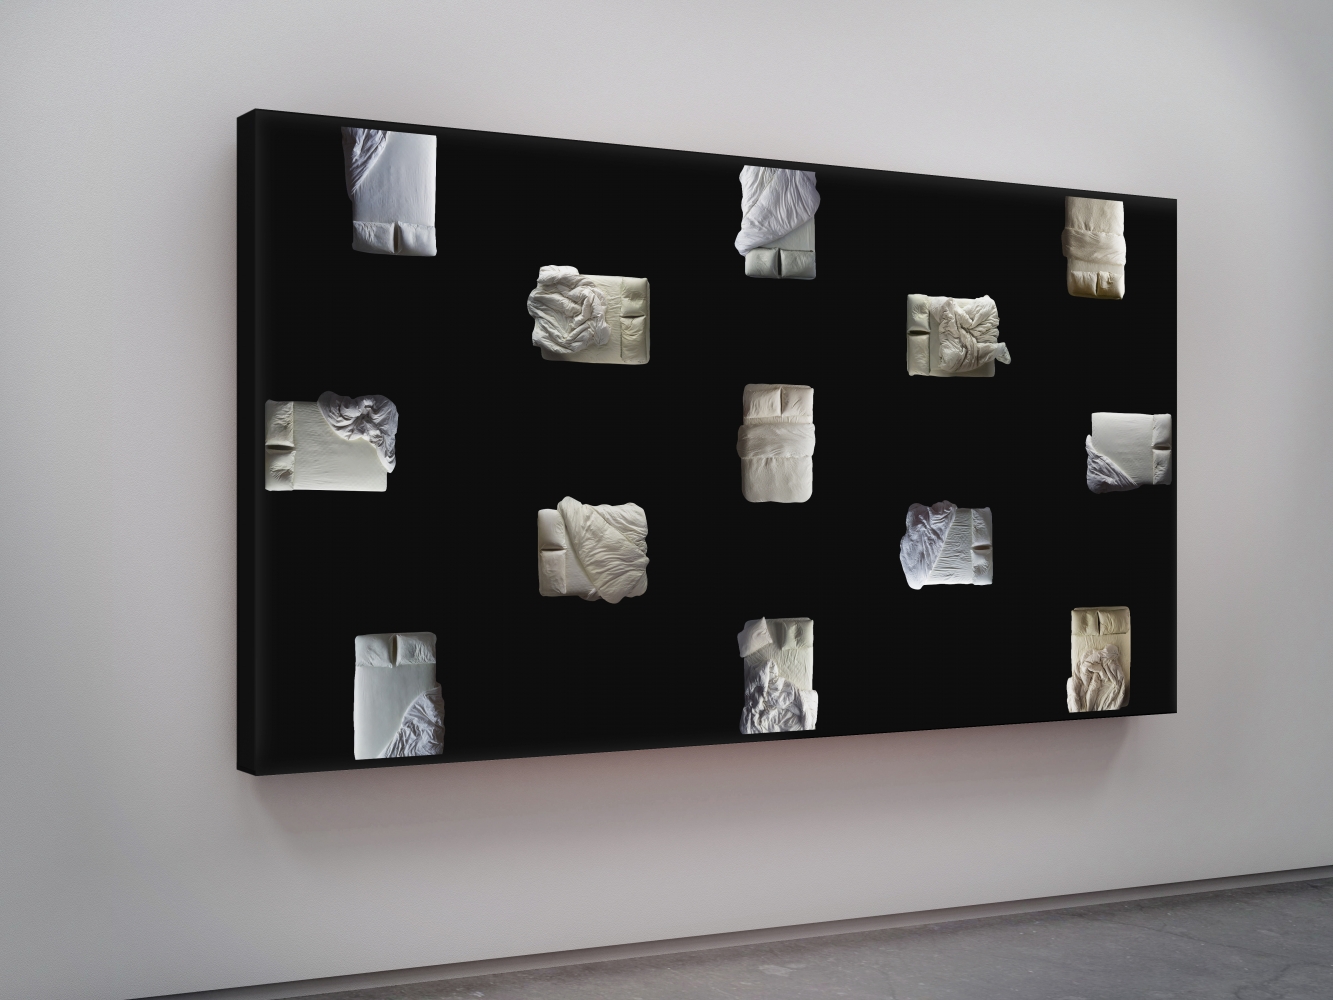 Doug Aitken

Later than you think (beds on canvas)

2019

Chromogenic transparency on acrylic in aluminum lightbox with LEDs

67 3/4 x 124 1/2 x 7 1/8 inches (172.1 x 316.2 x 18.1 cm)

Edition&amp;nbsp;of 4, with 2 AP

DA 665

&amp;nbsp;

INQUIRE